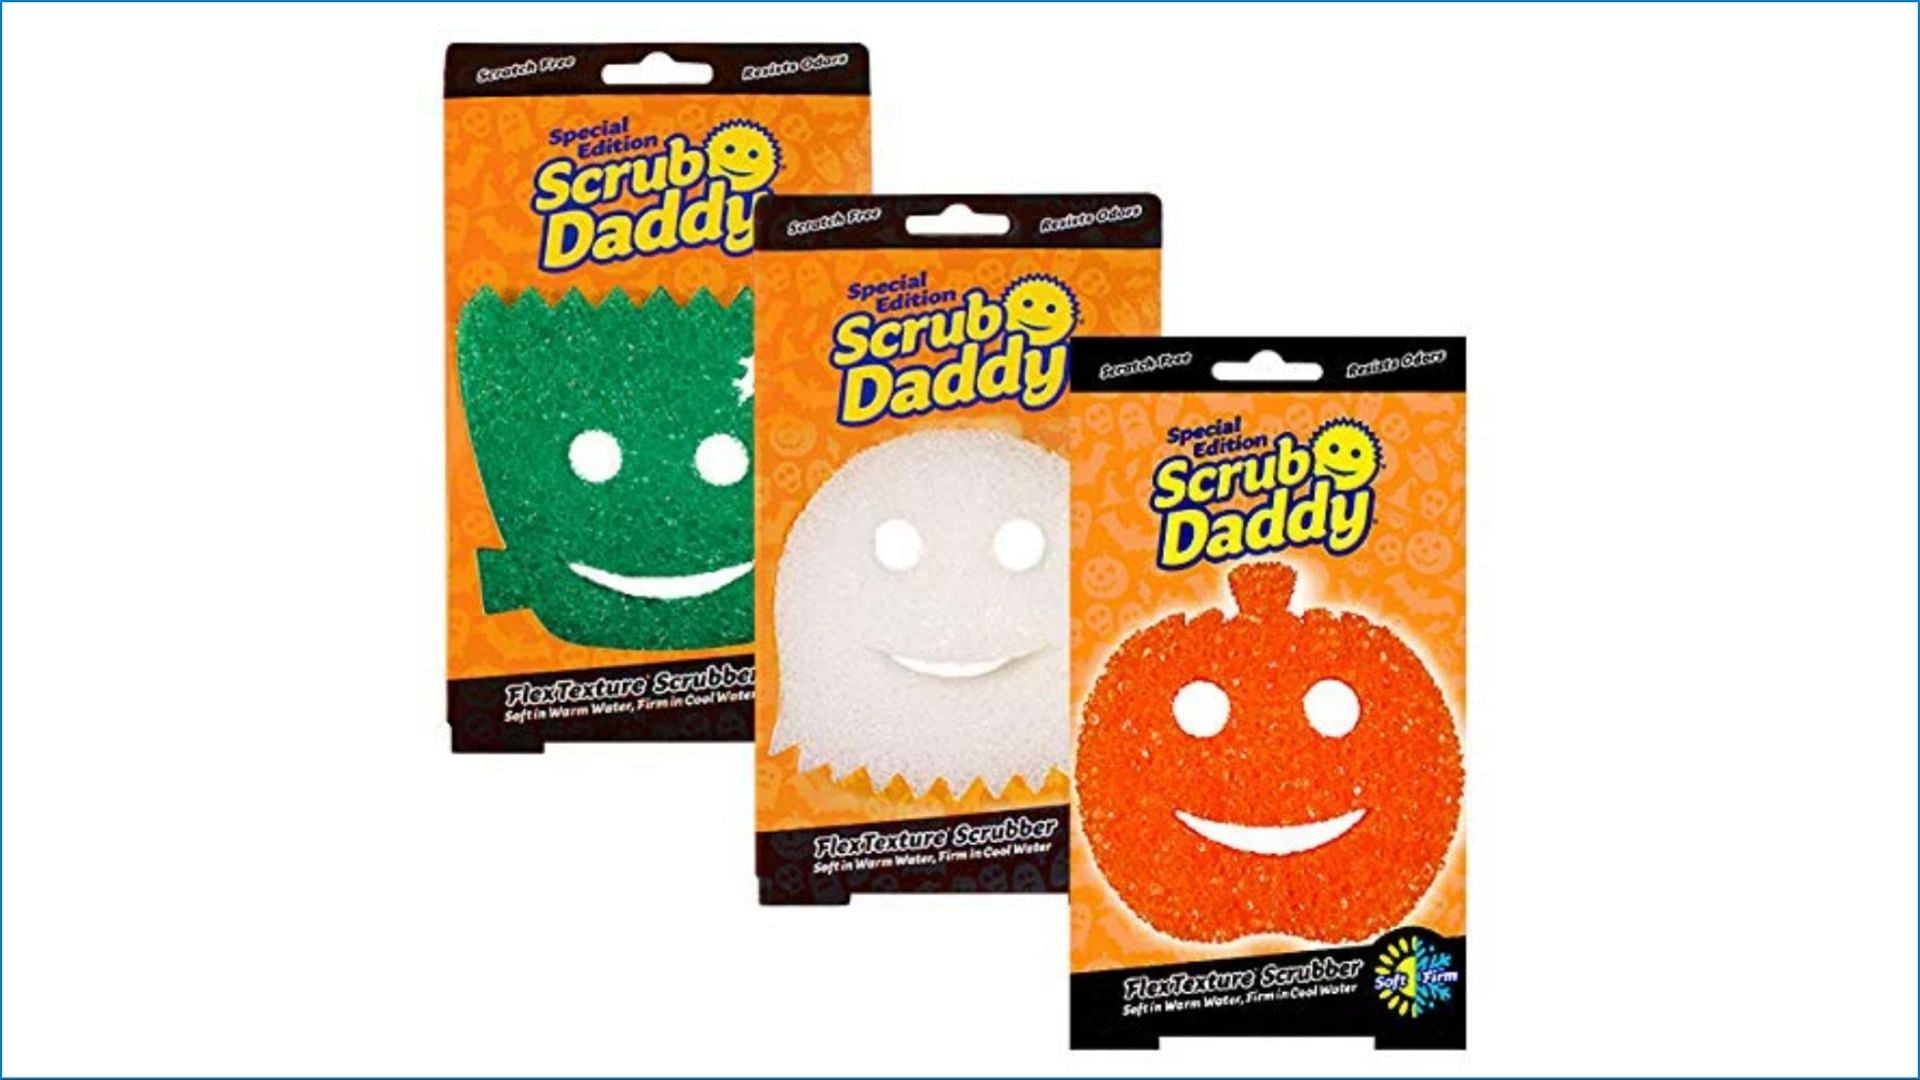 The limited edition Scrub Daddy Sponges can be found in three variants at the nearest store (Image via Walmart)